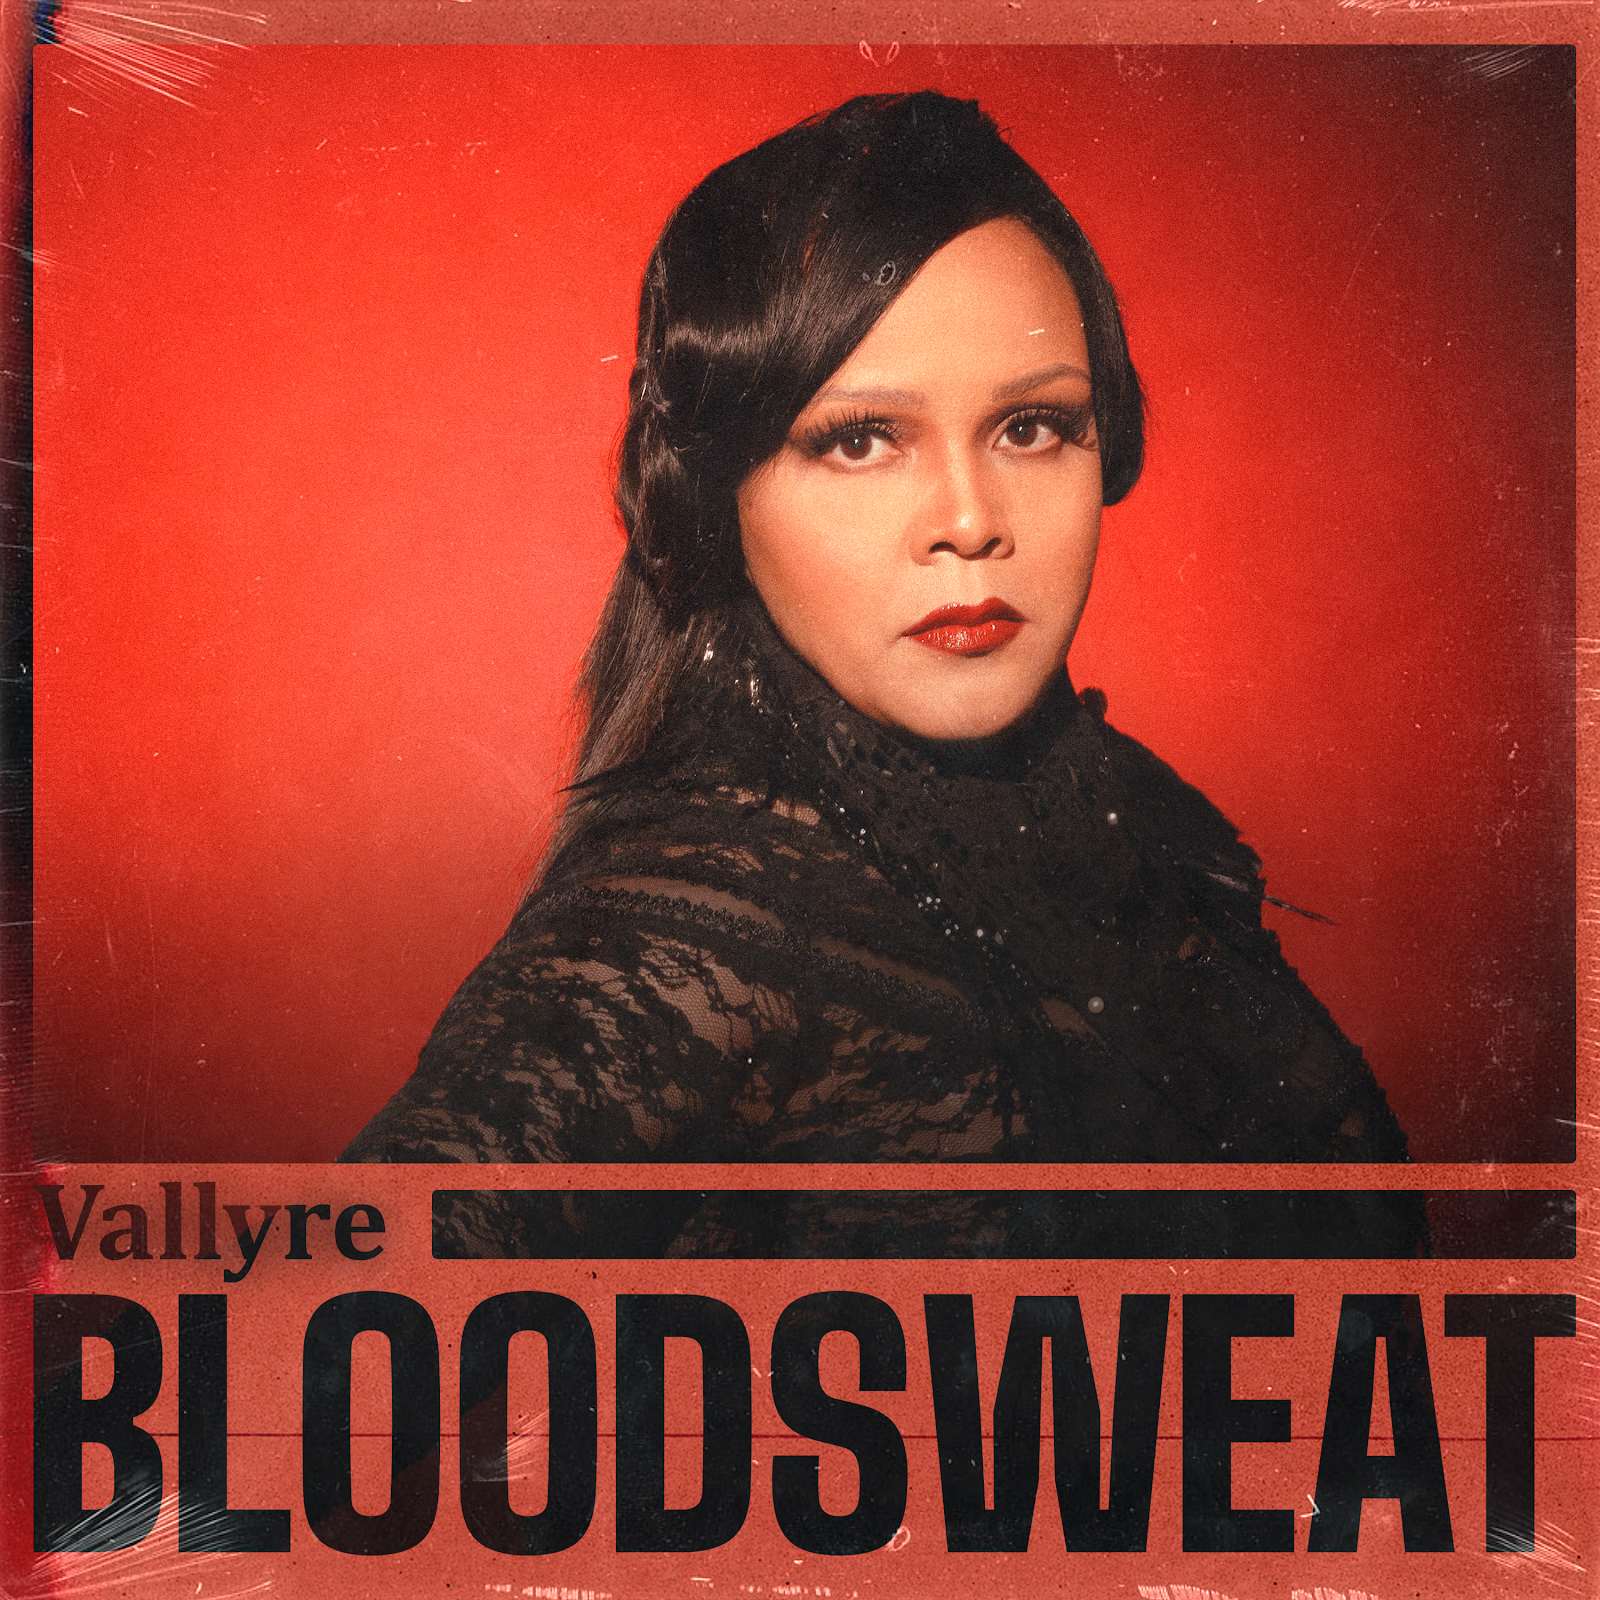 Vallyre Releases Latest Masterwork Titled “Bloodsweat”